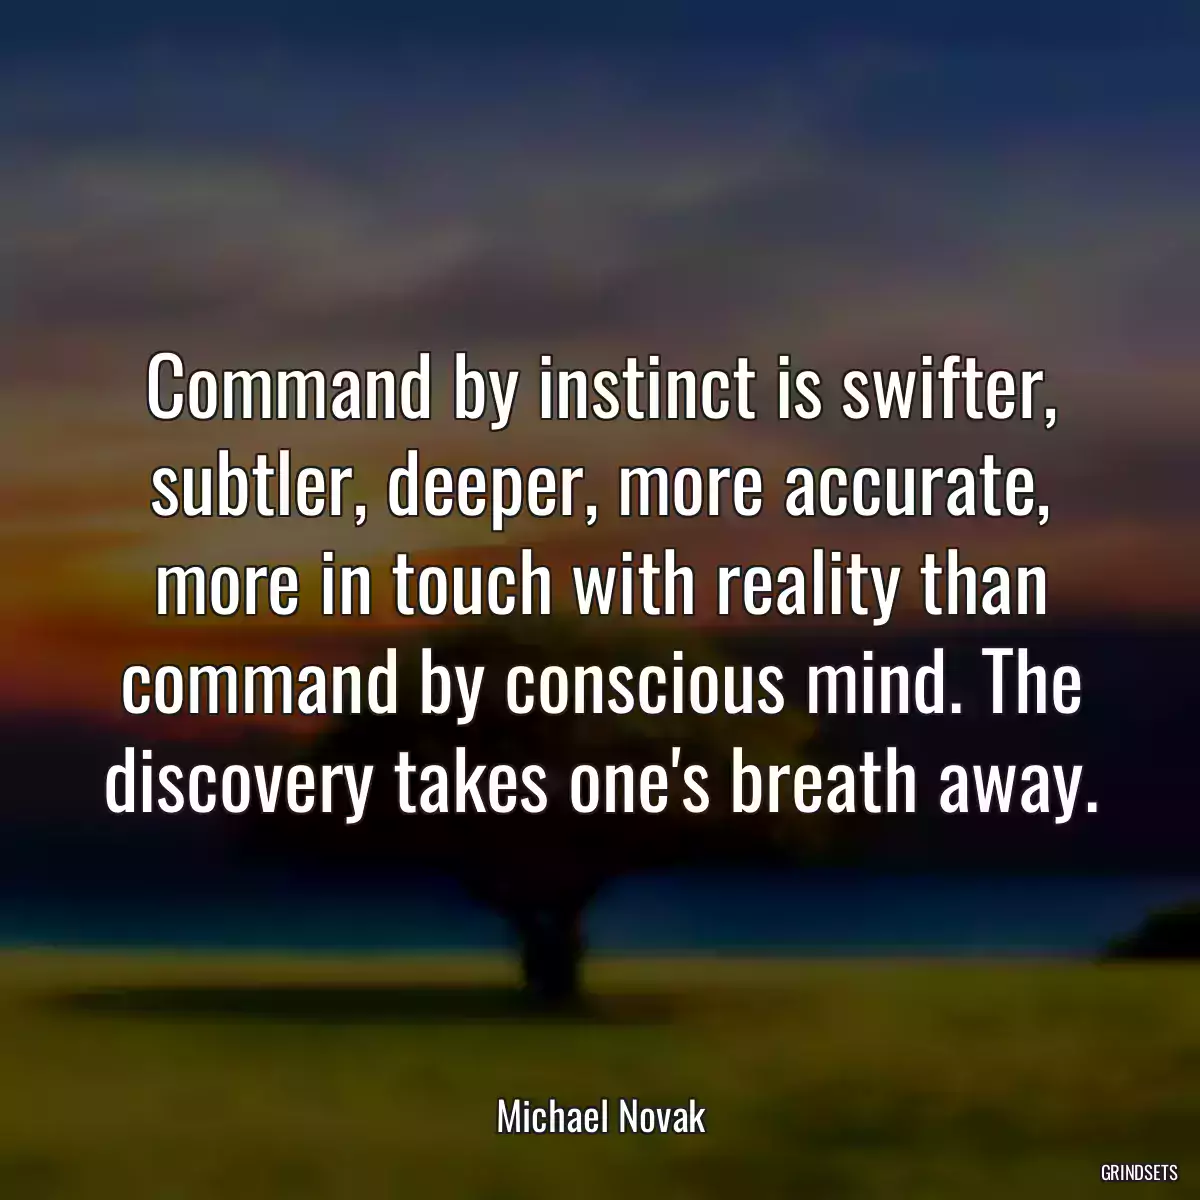 Command by instinct is swifter, subtler, deeper, more accurate, more in touch with reality than command by conscious mind. The discovery takes one\'s breath away.